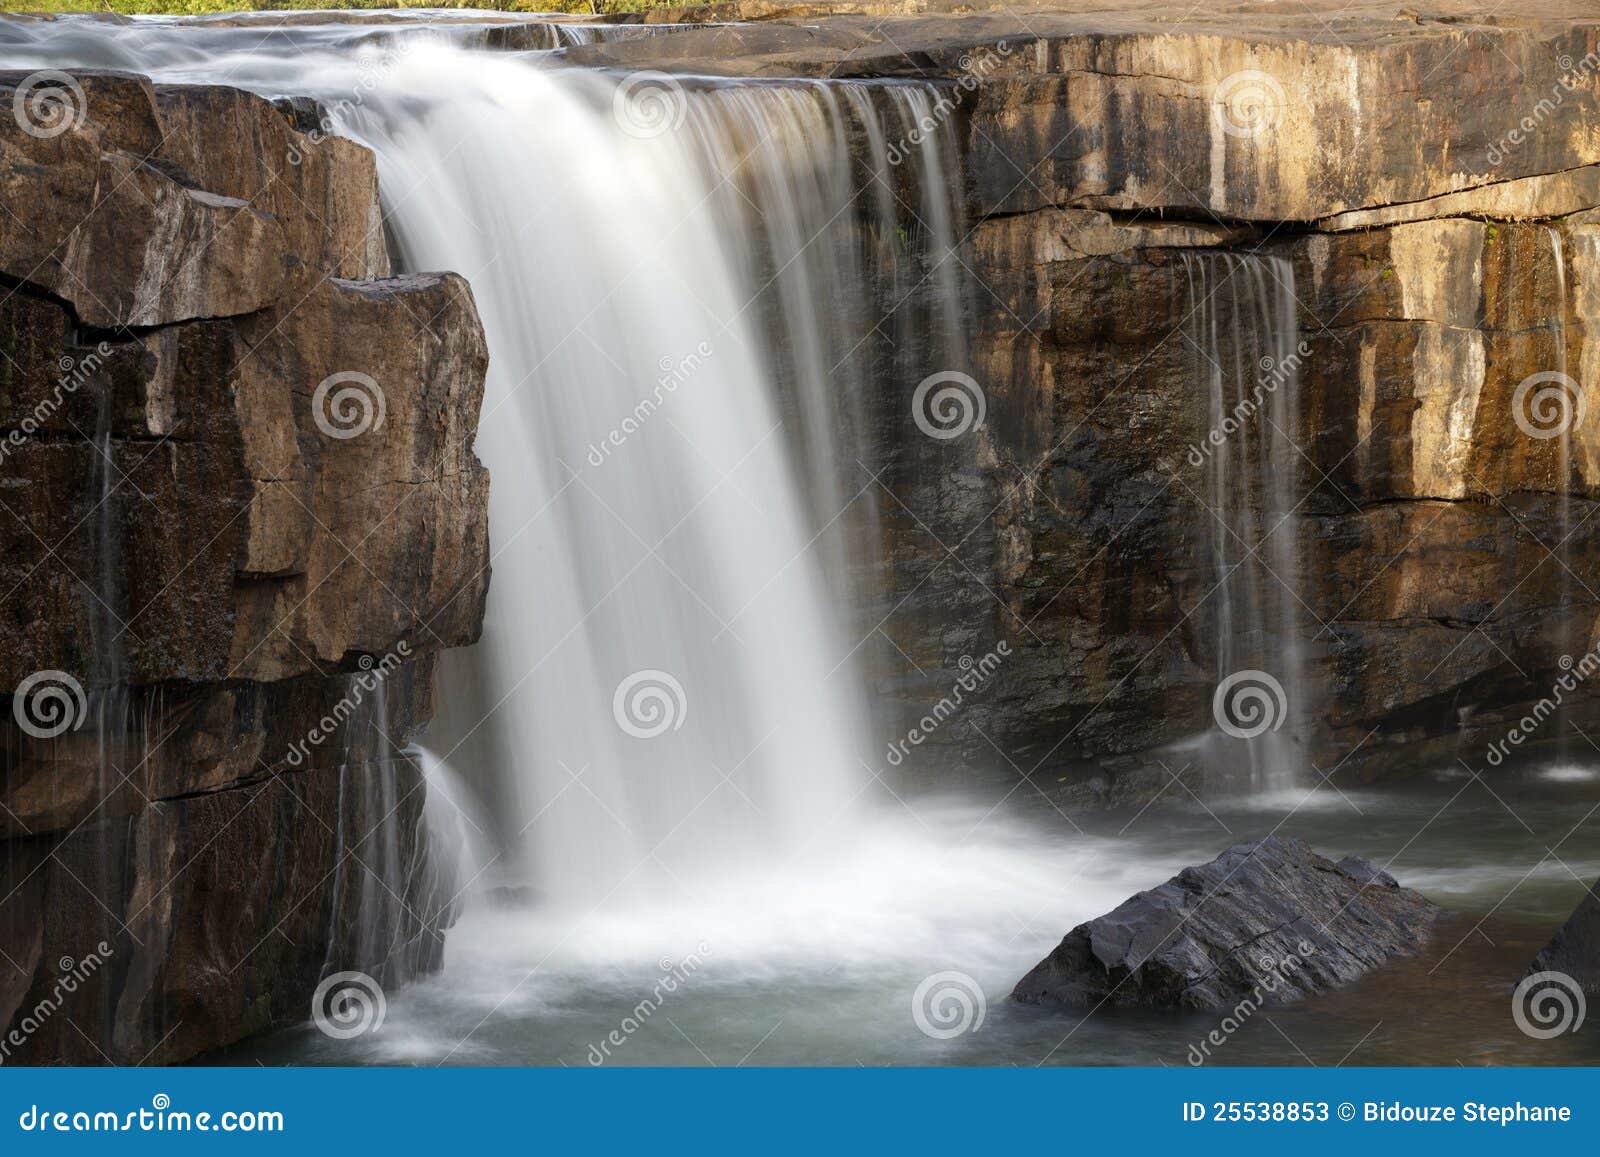 Tropical Waterfall Stock Image Image Of Flowing Stream 25538853